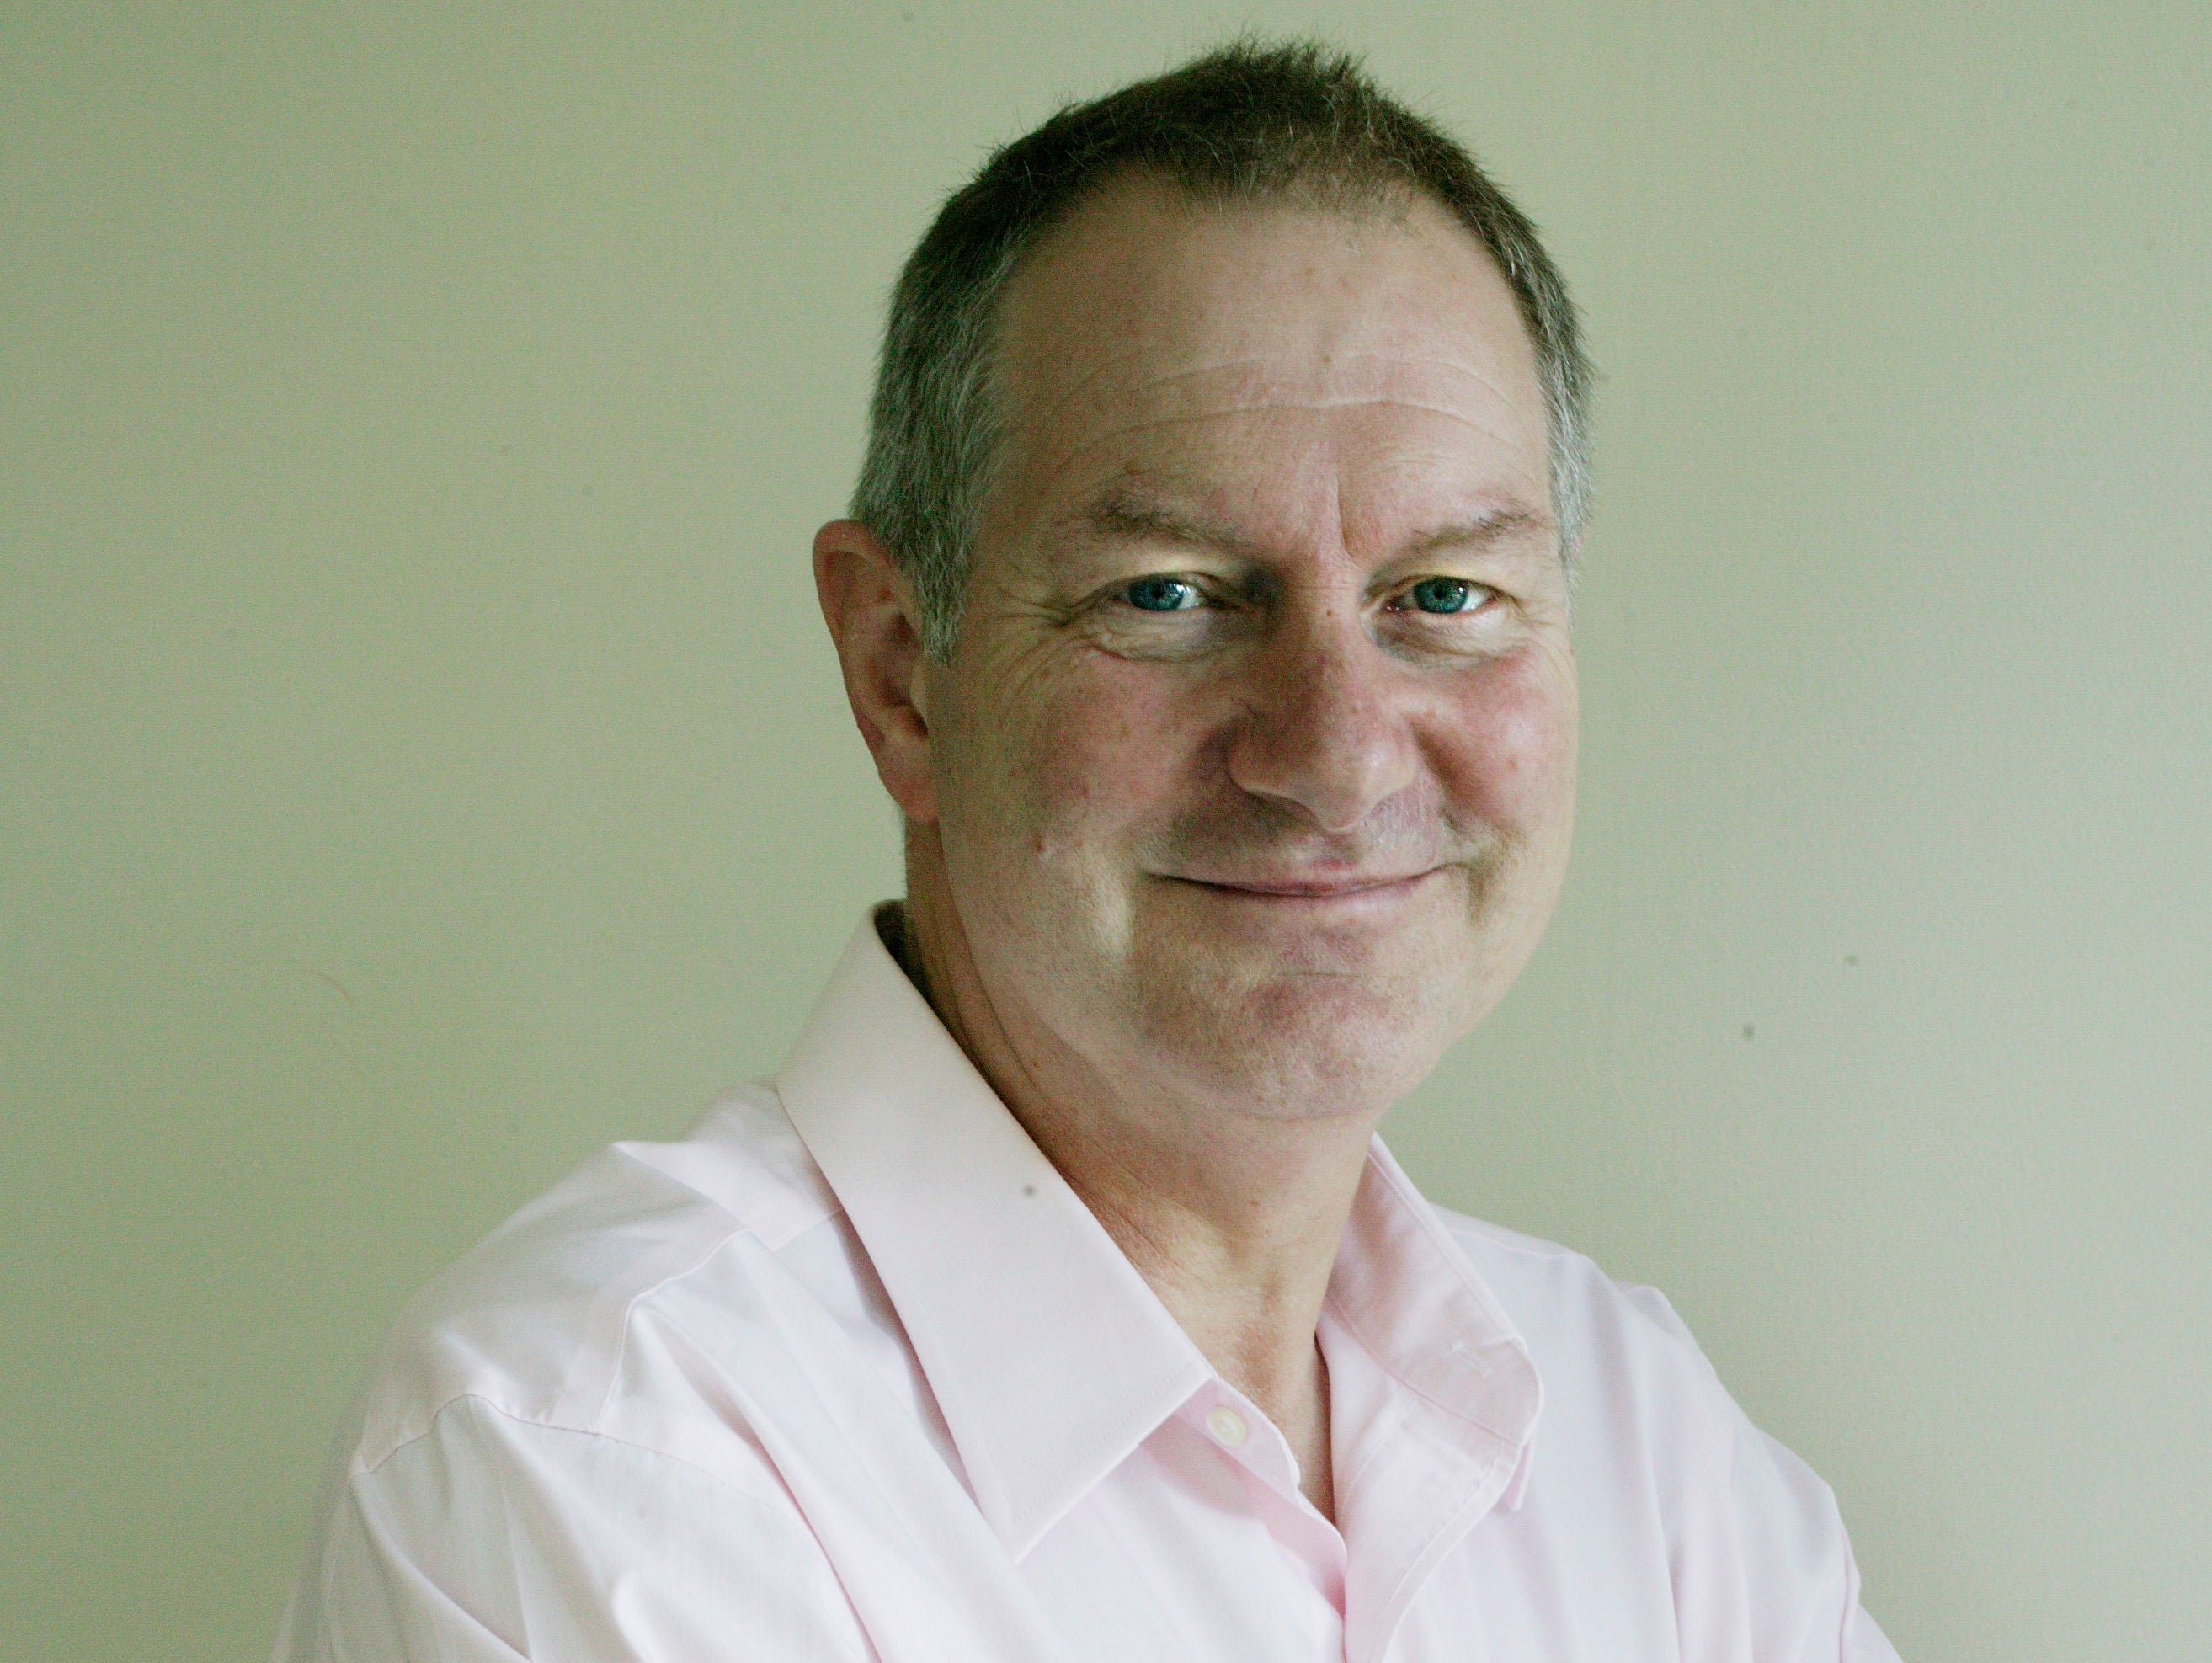 Roy Greenslade to stop blogging for IPSO and step down from lecturing at City University